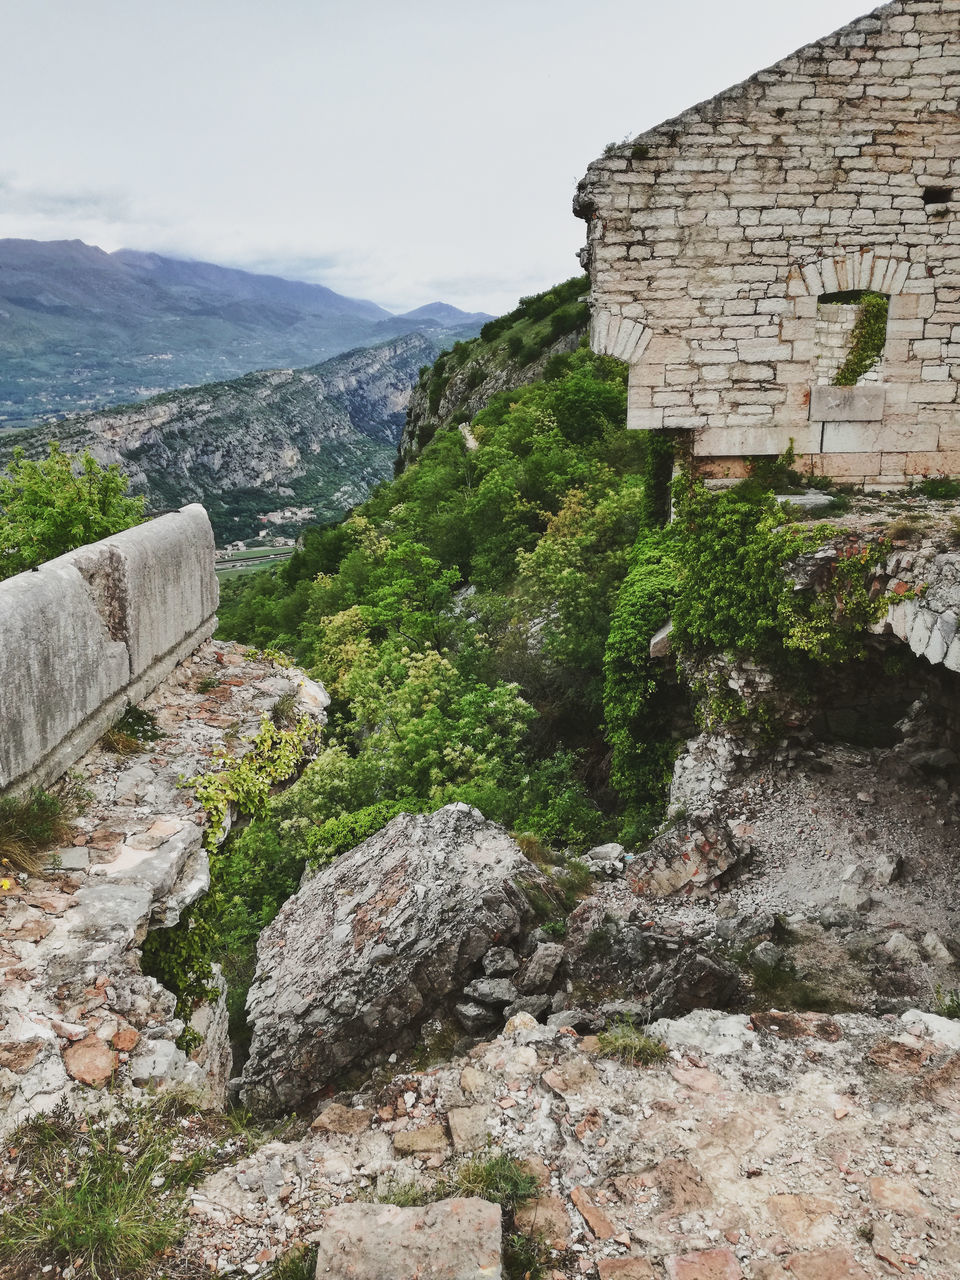 Panoramic View Ruins Architecture Broken Structure Building Exterior Built Structure Collapsed Building Diminishing Perspective Fortress History Military Installations Nature No People Outdoors Rock Scenics - Nature Stone Wall Stones View From Above